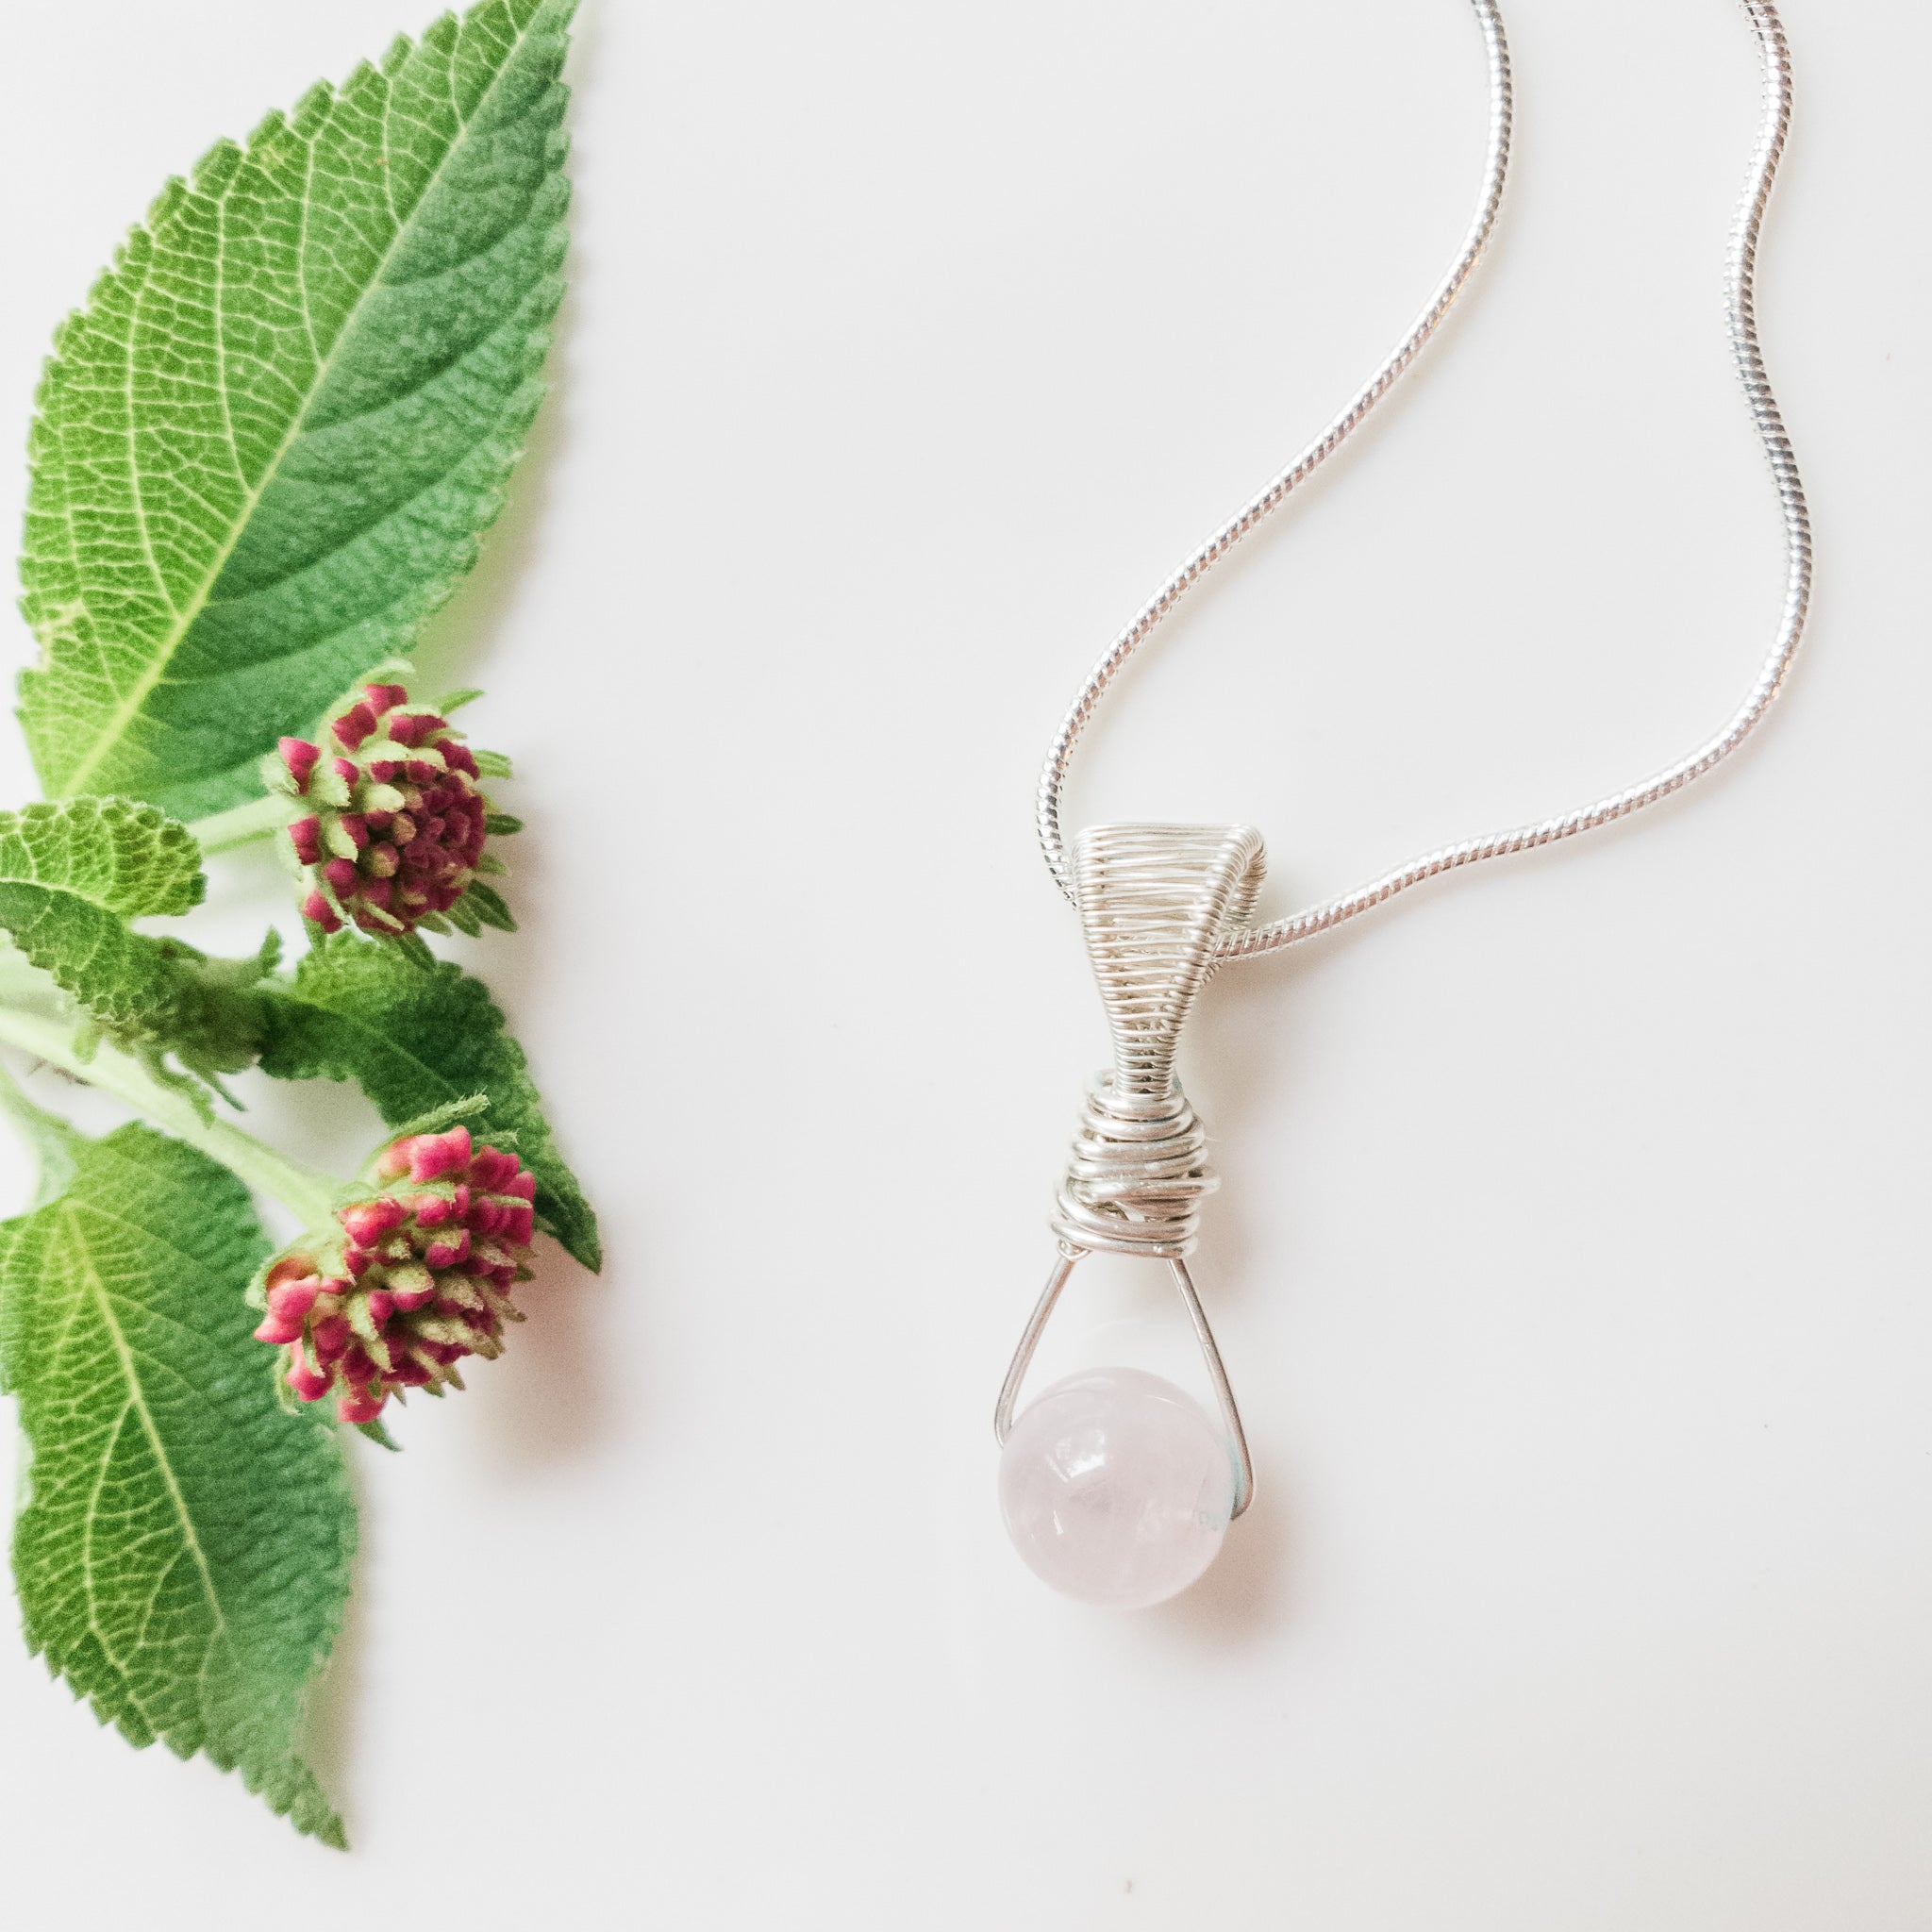 Signature Collection - Natural Rose Quartz Pendant on Sterling Silver Necklace close-up view - BellaChel Jeweler